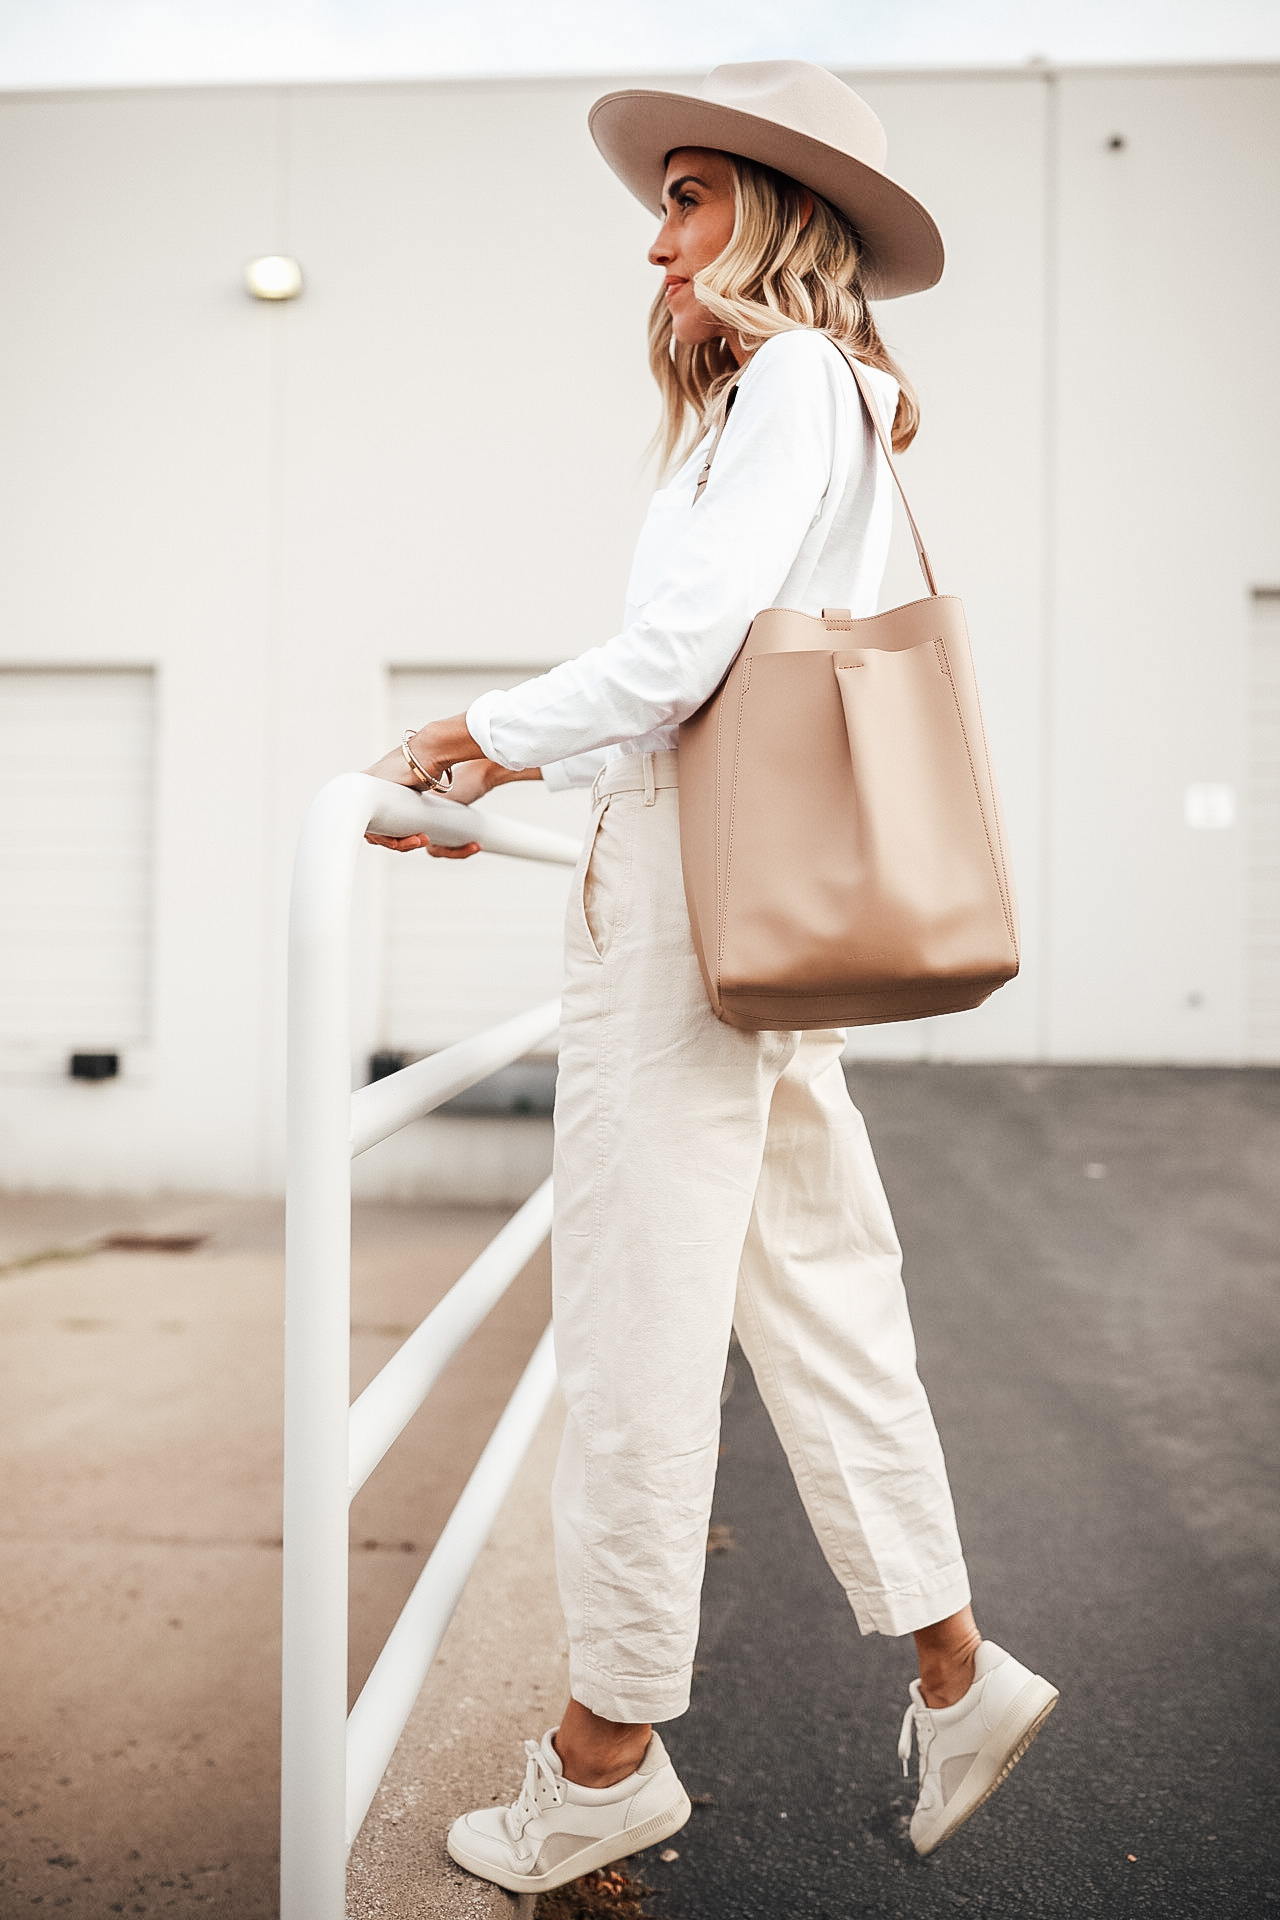 Everlane Studio Bag Review - Sizing, Quality & What Fits - whatveewore